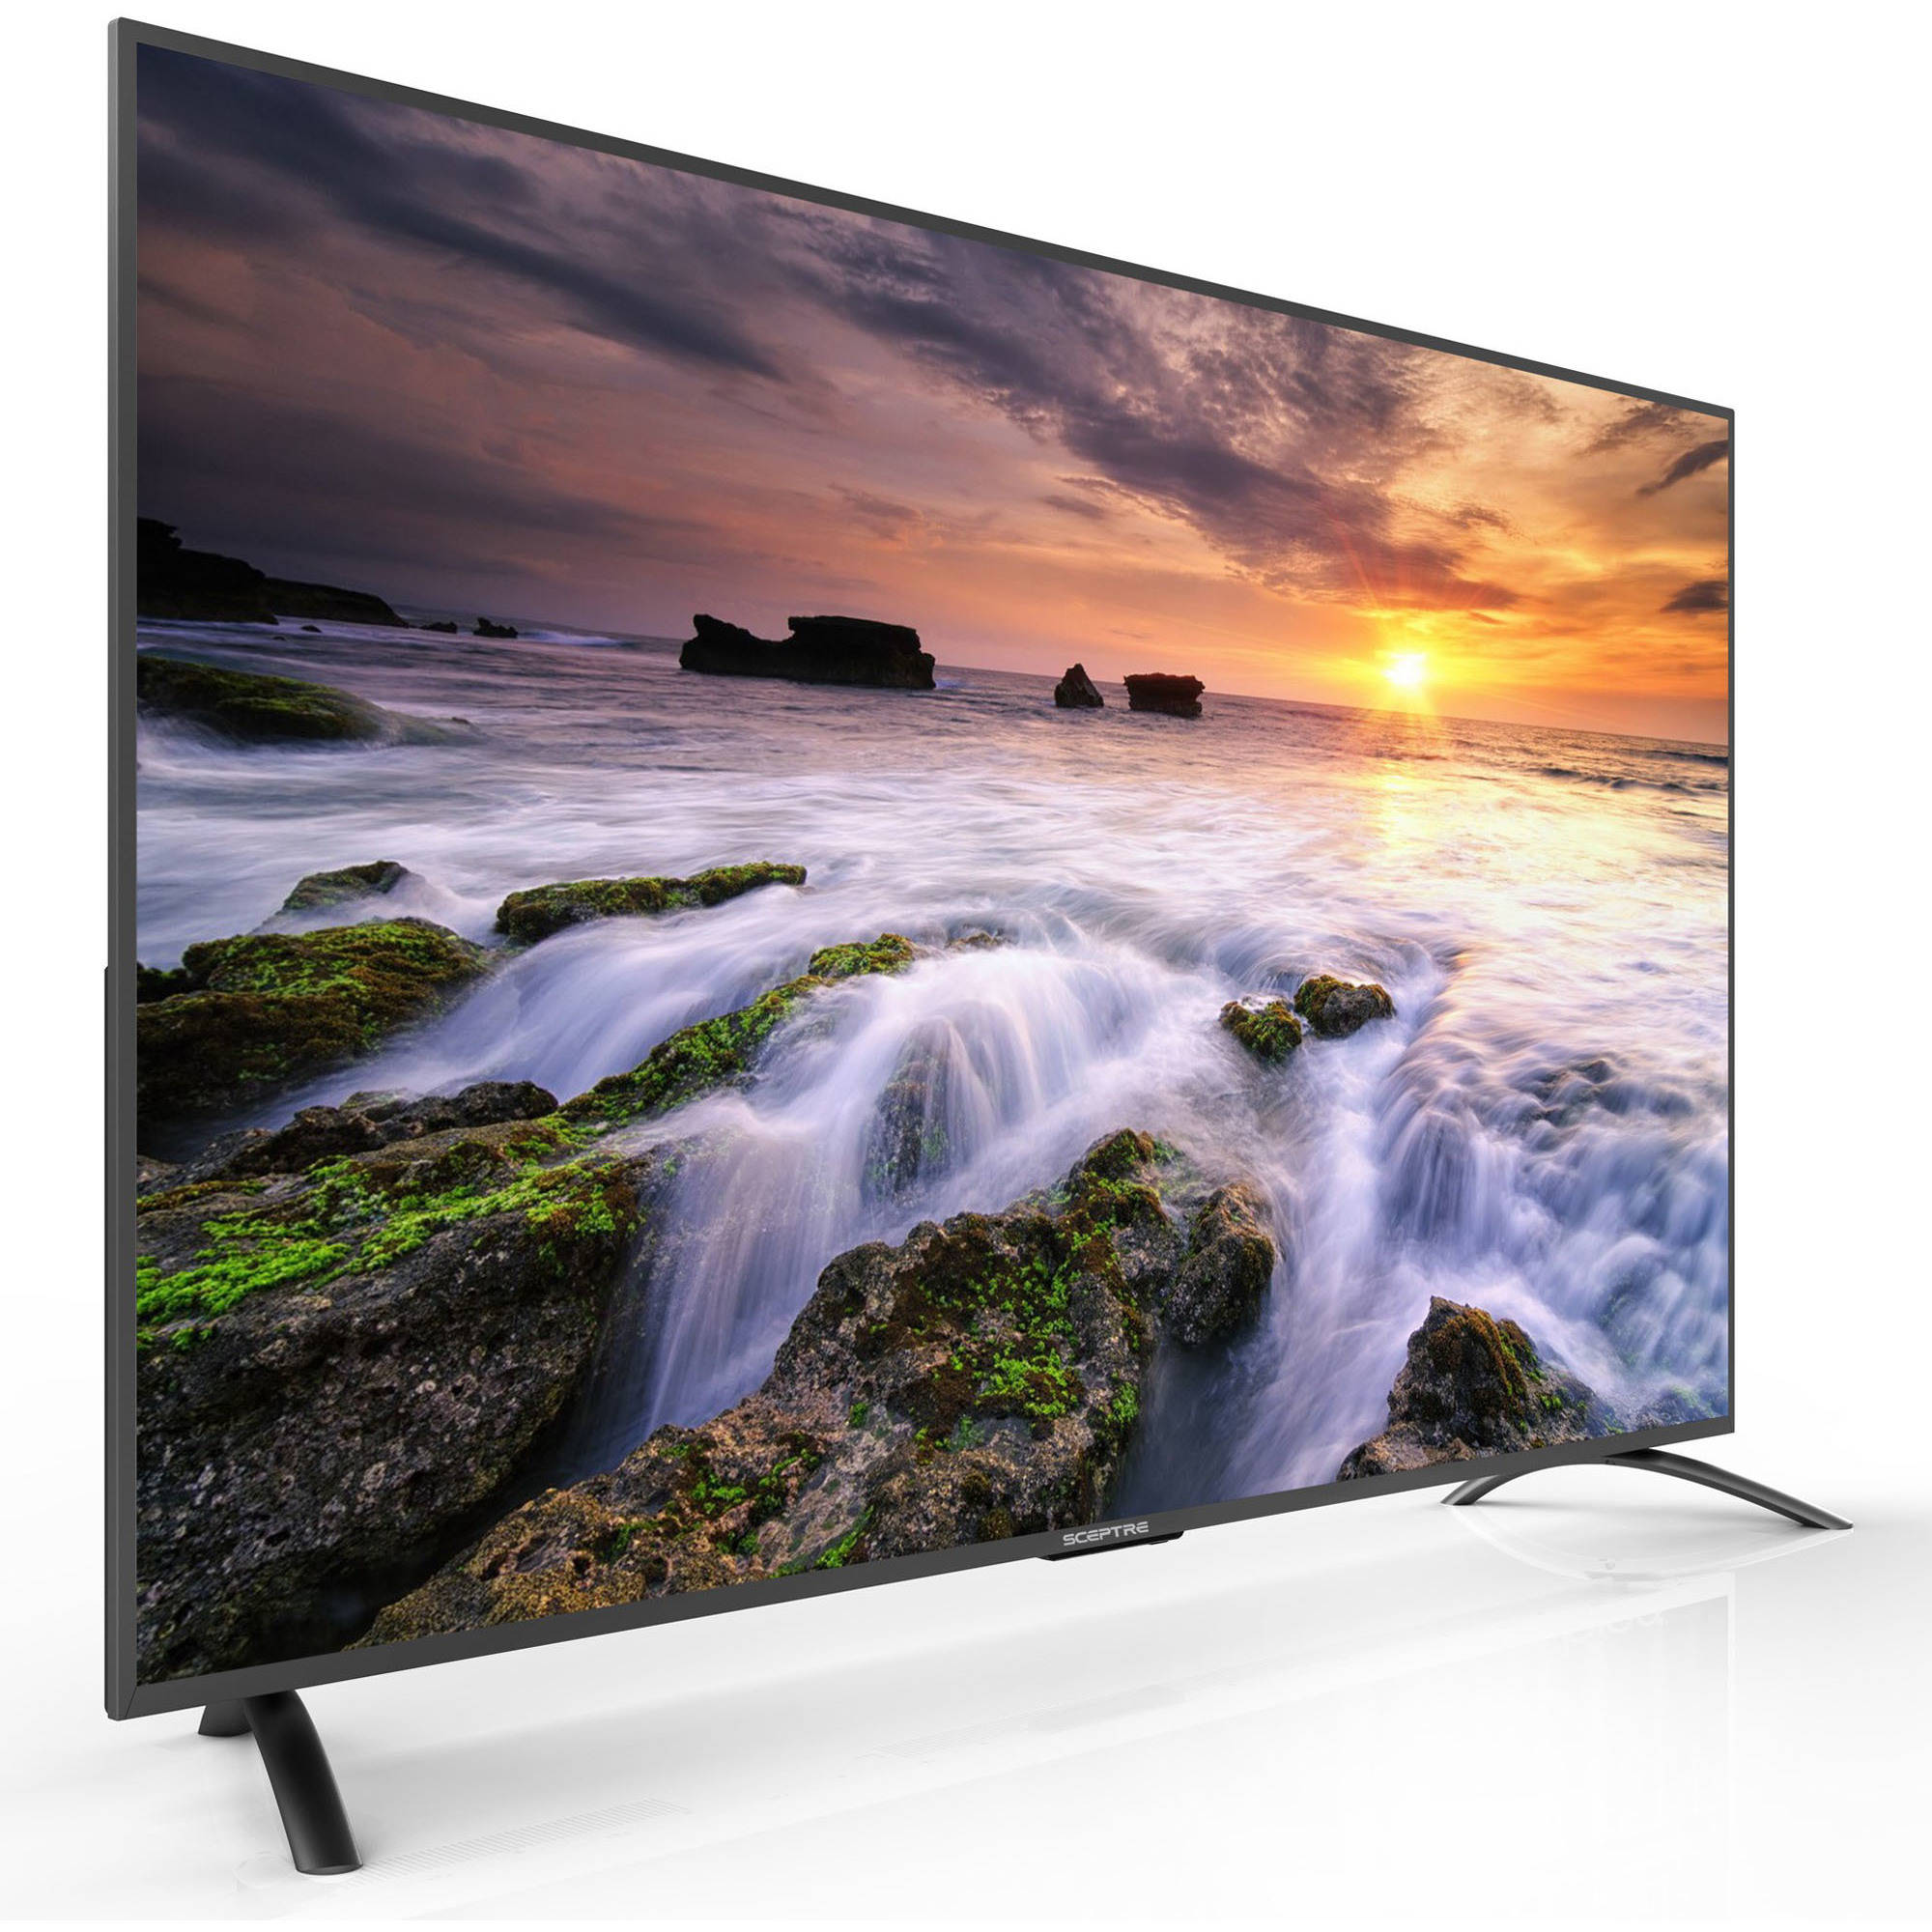 75″ 4K TV for $698, free shipping